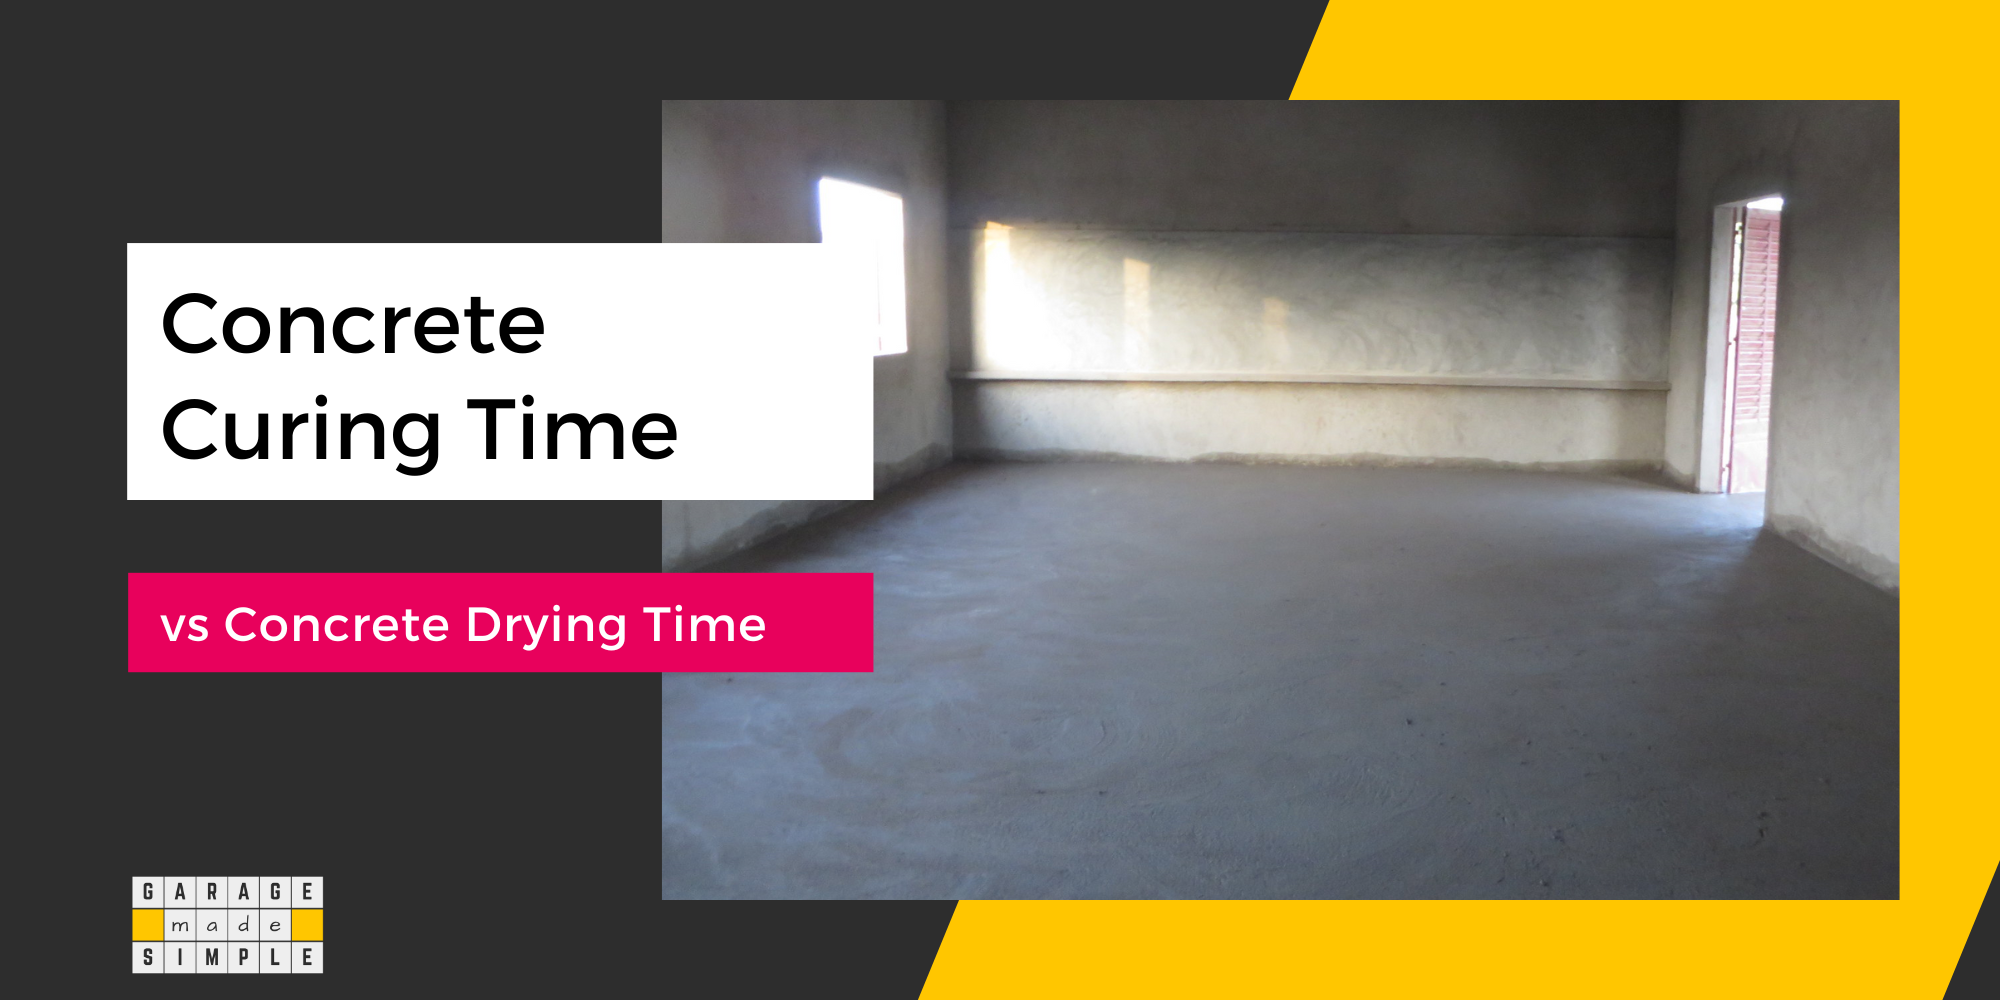 Concrete Curing Time vs Concrete Drying Time